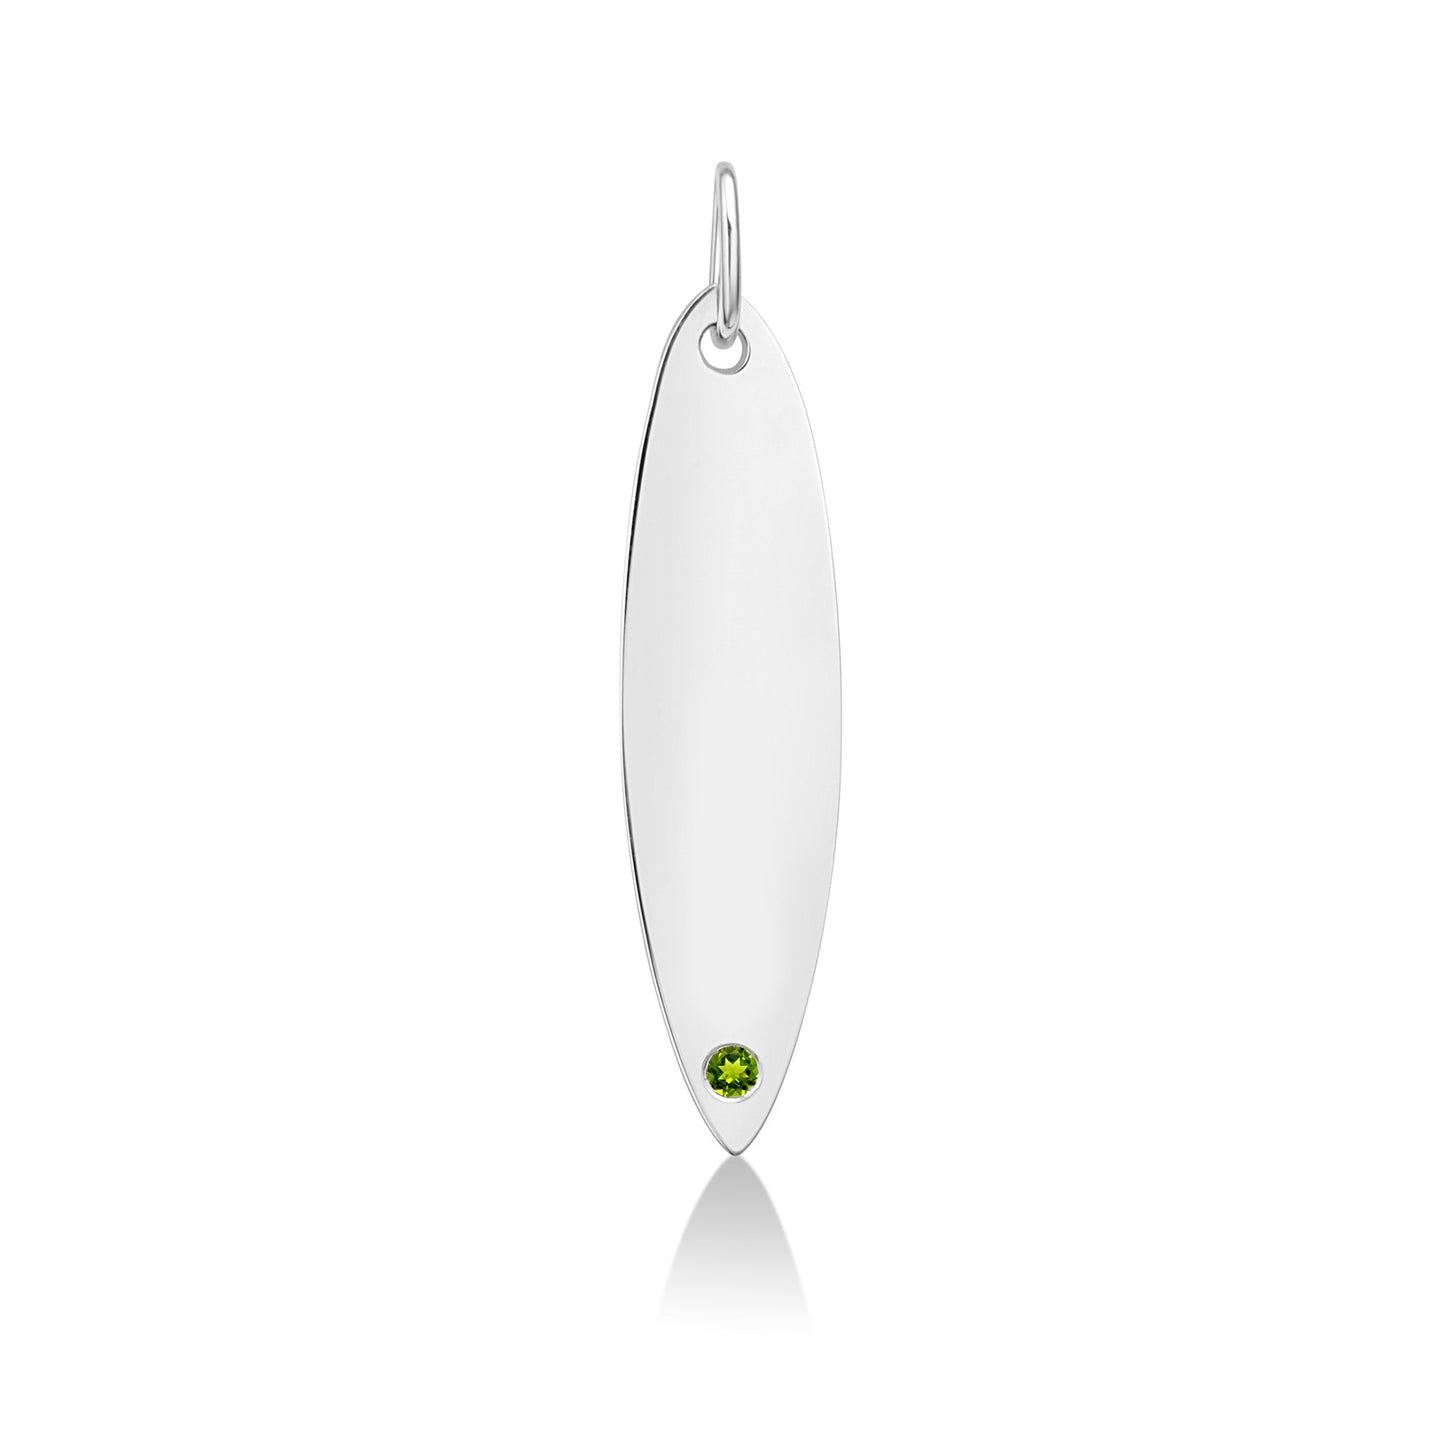 14k white gold surfboard charm lock with peridot